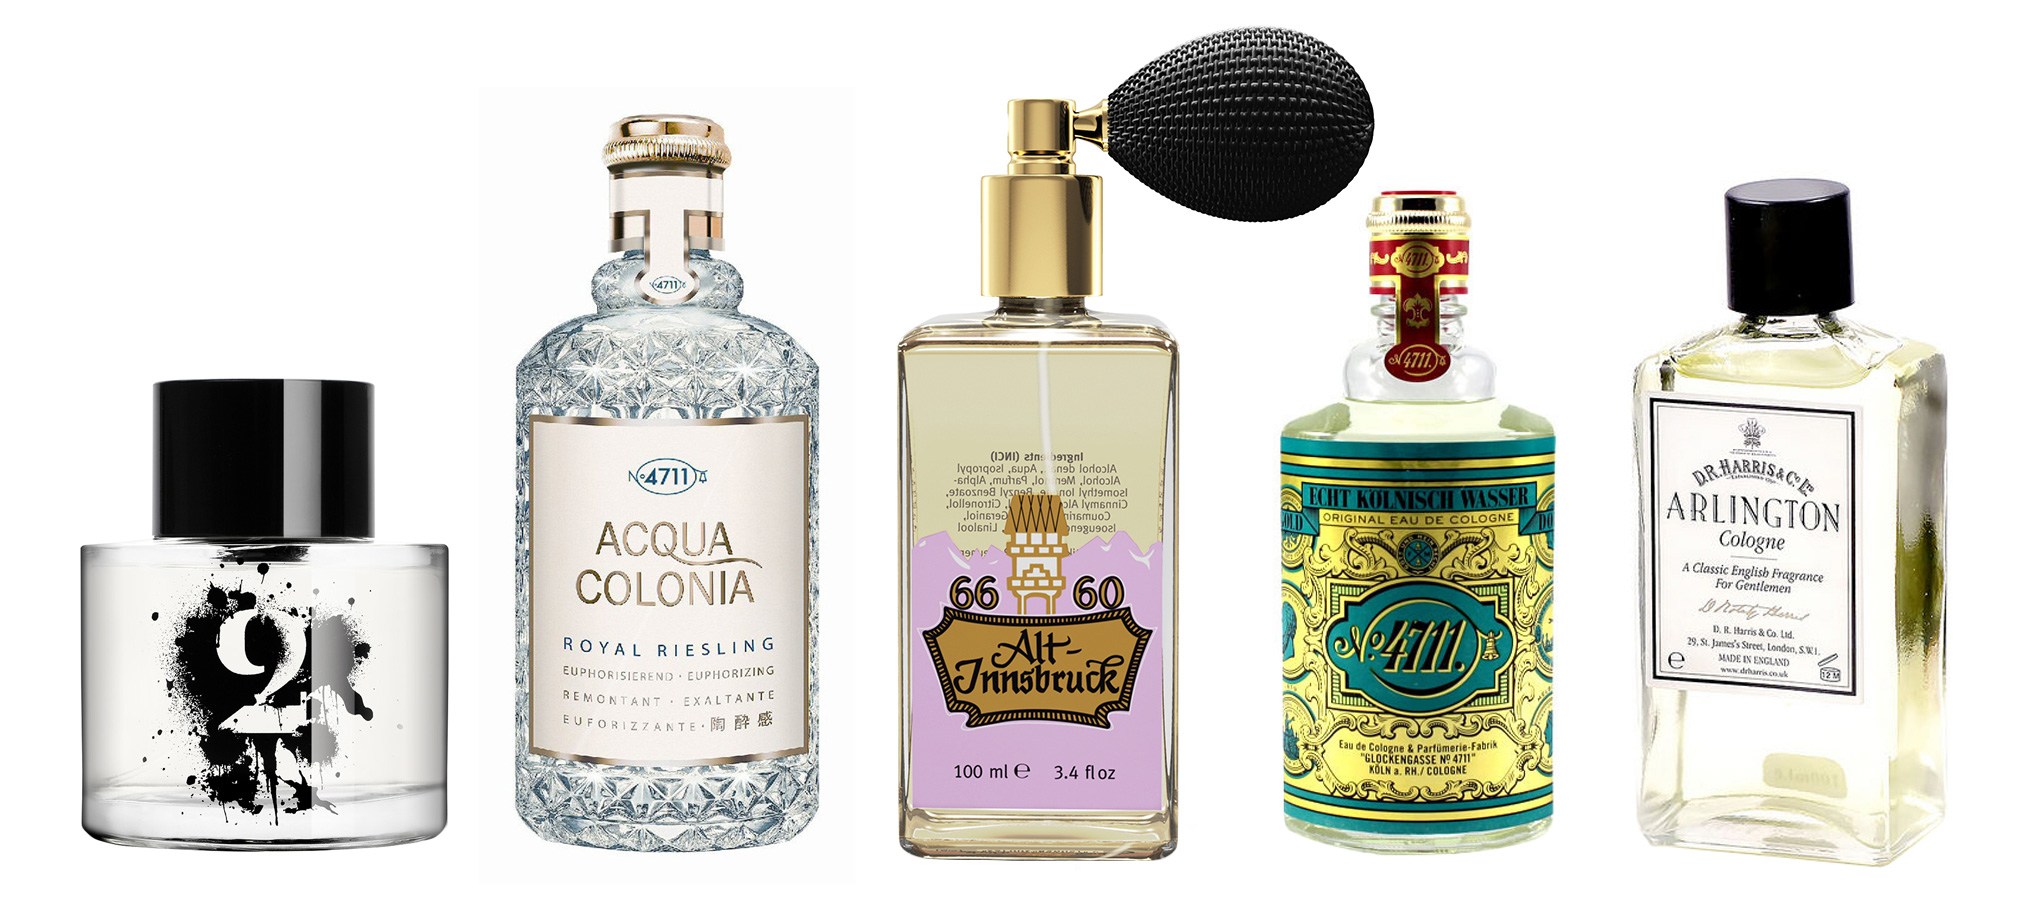 Choosing the Best Cologne for Men: Find your Perfect Cologne